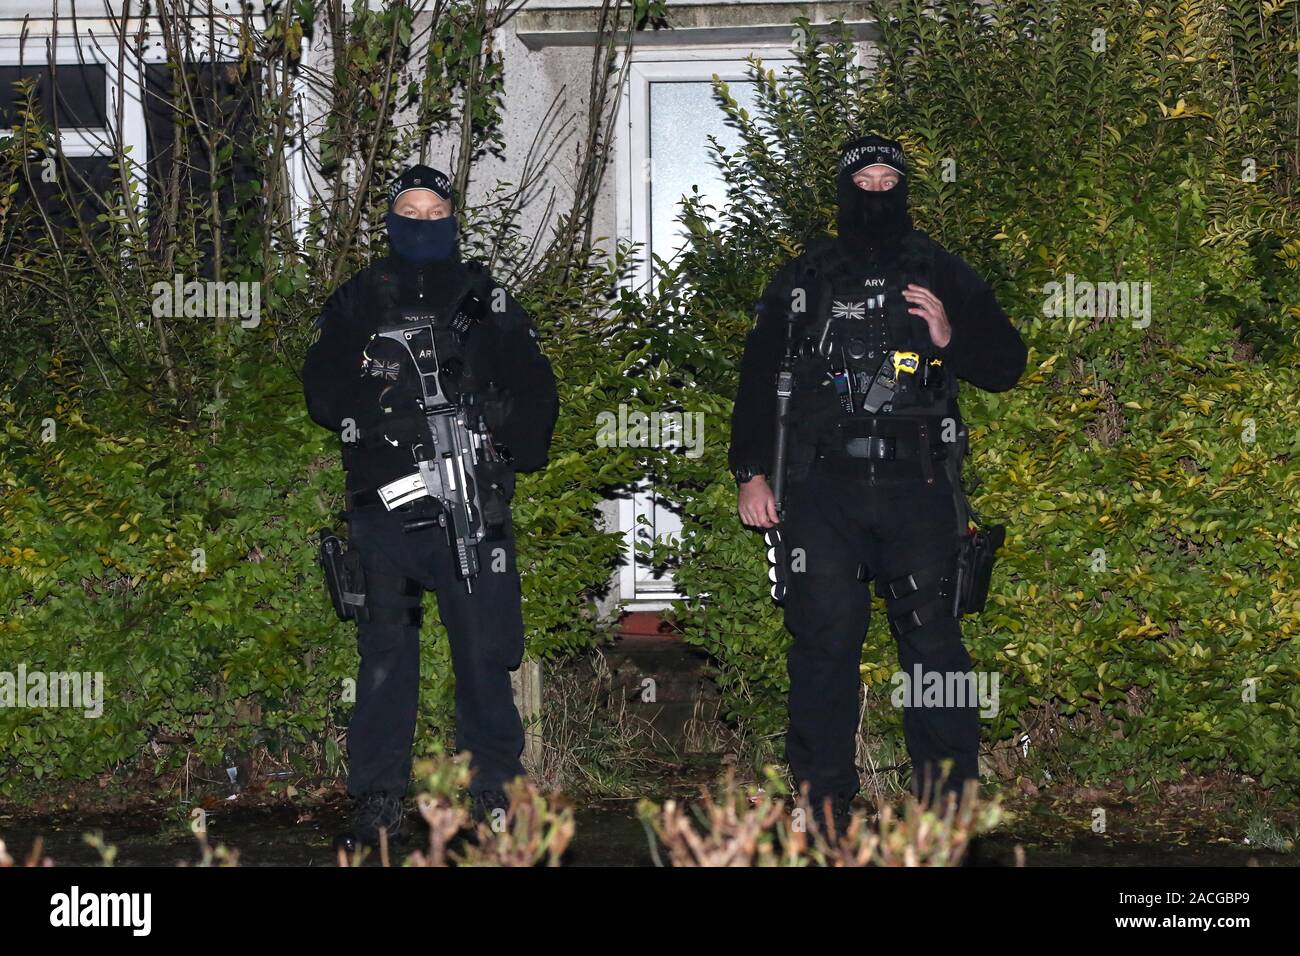 Armed police stand outside a house in Loughton, Essex, thought to be connected to Terry Glover who is currently wanted for questioning after a serious crash near a secondary school on Monday left a 12 year old boy dead and others seriously injured. Stock Photo